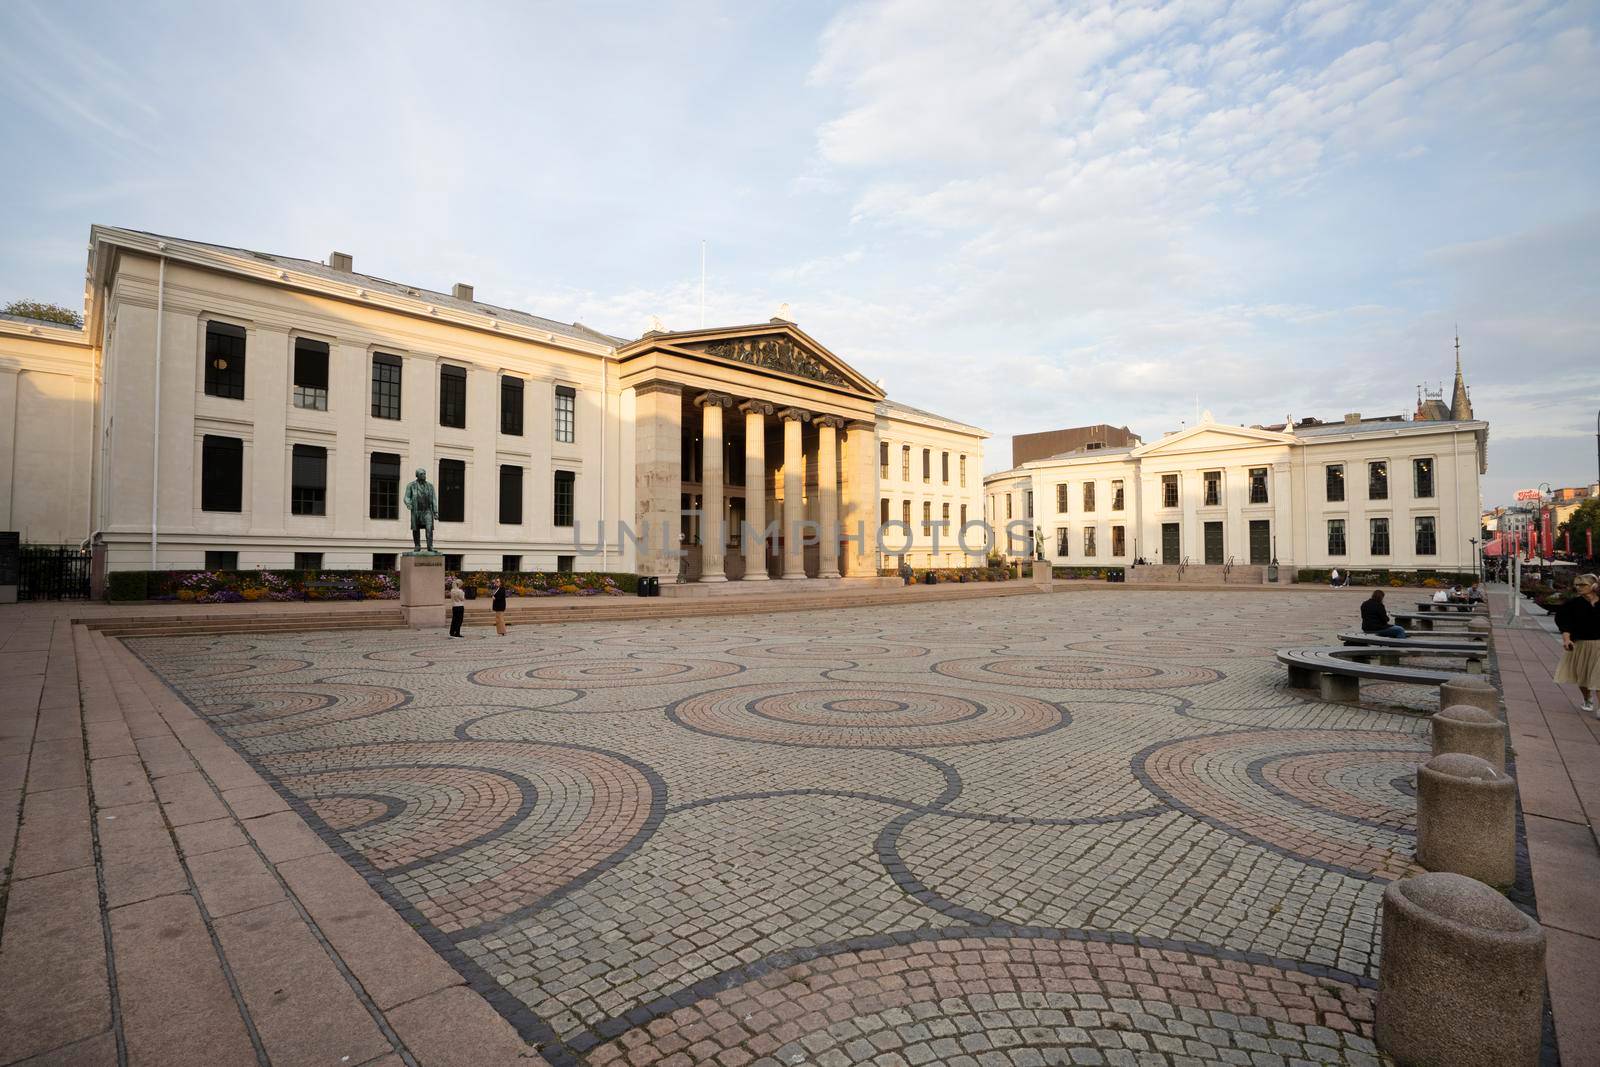 The university of Oslo palace, Norway. by sergiodv